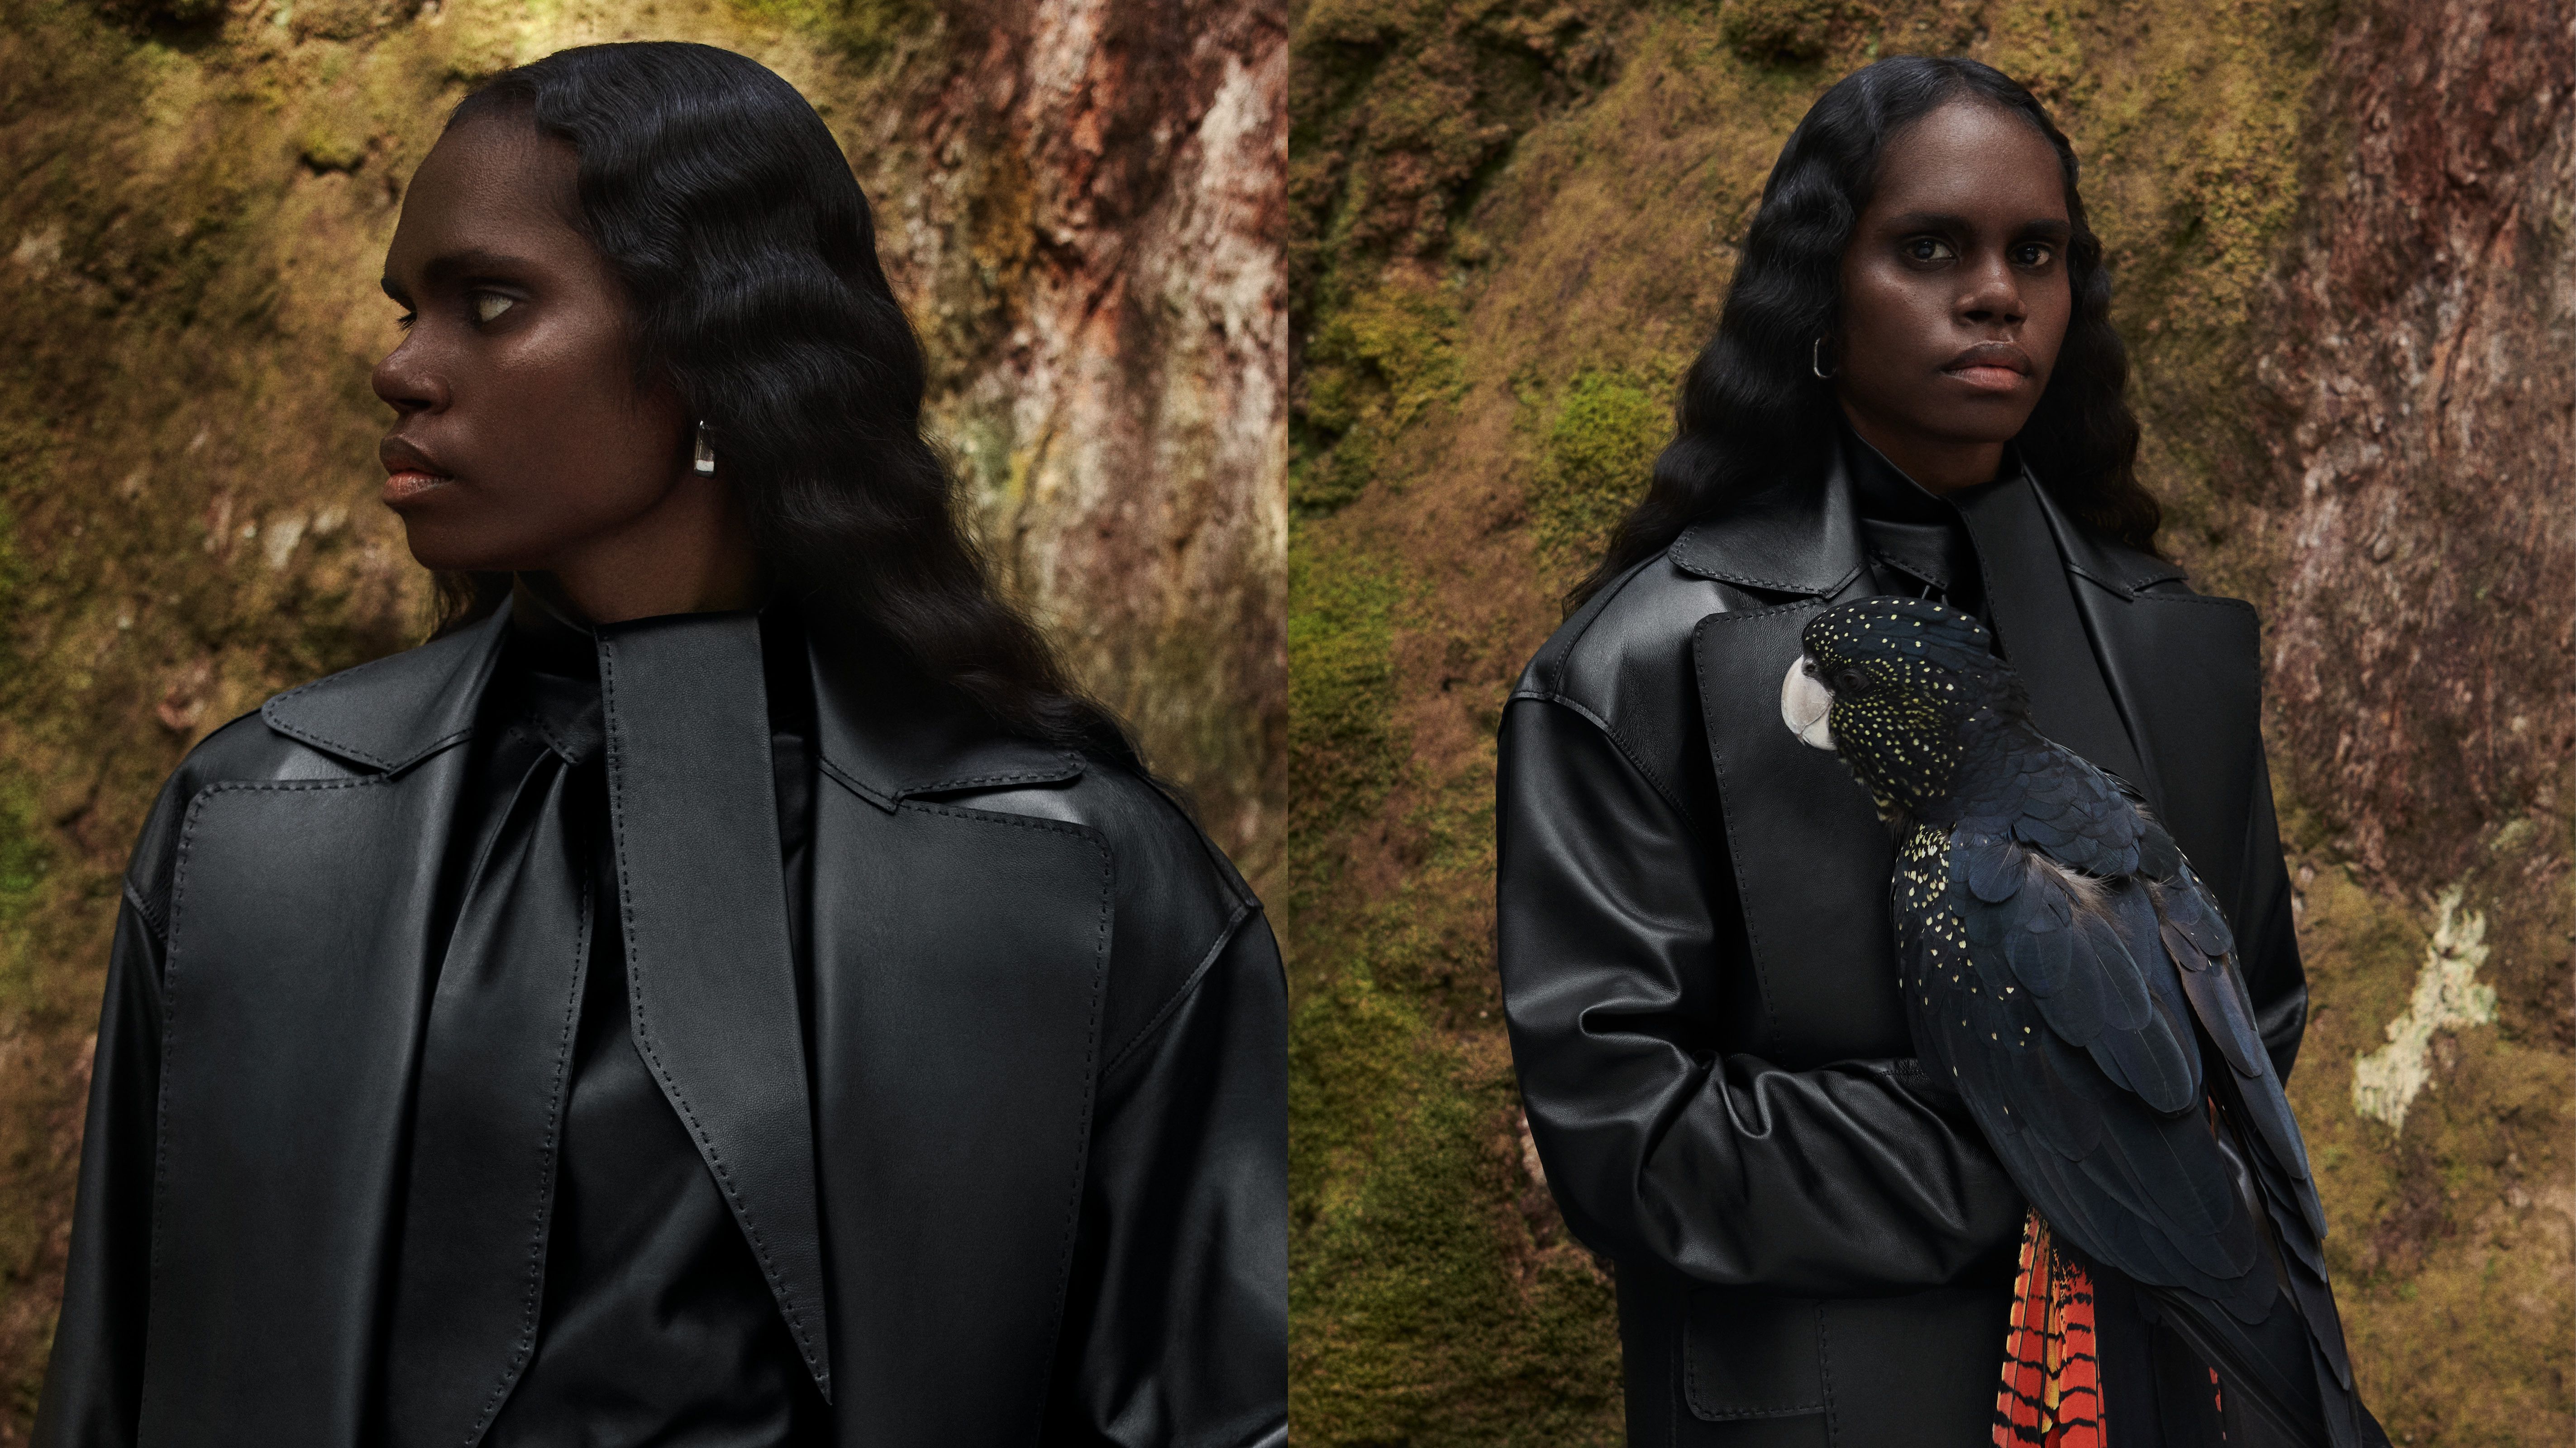 Two images side by side of Tarlisa wearing a black leather top and trench coat with a cockatoo.